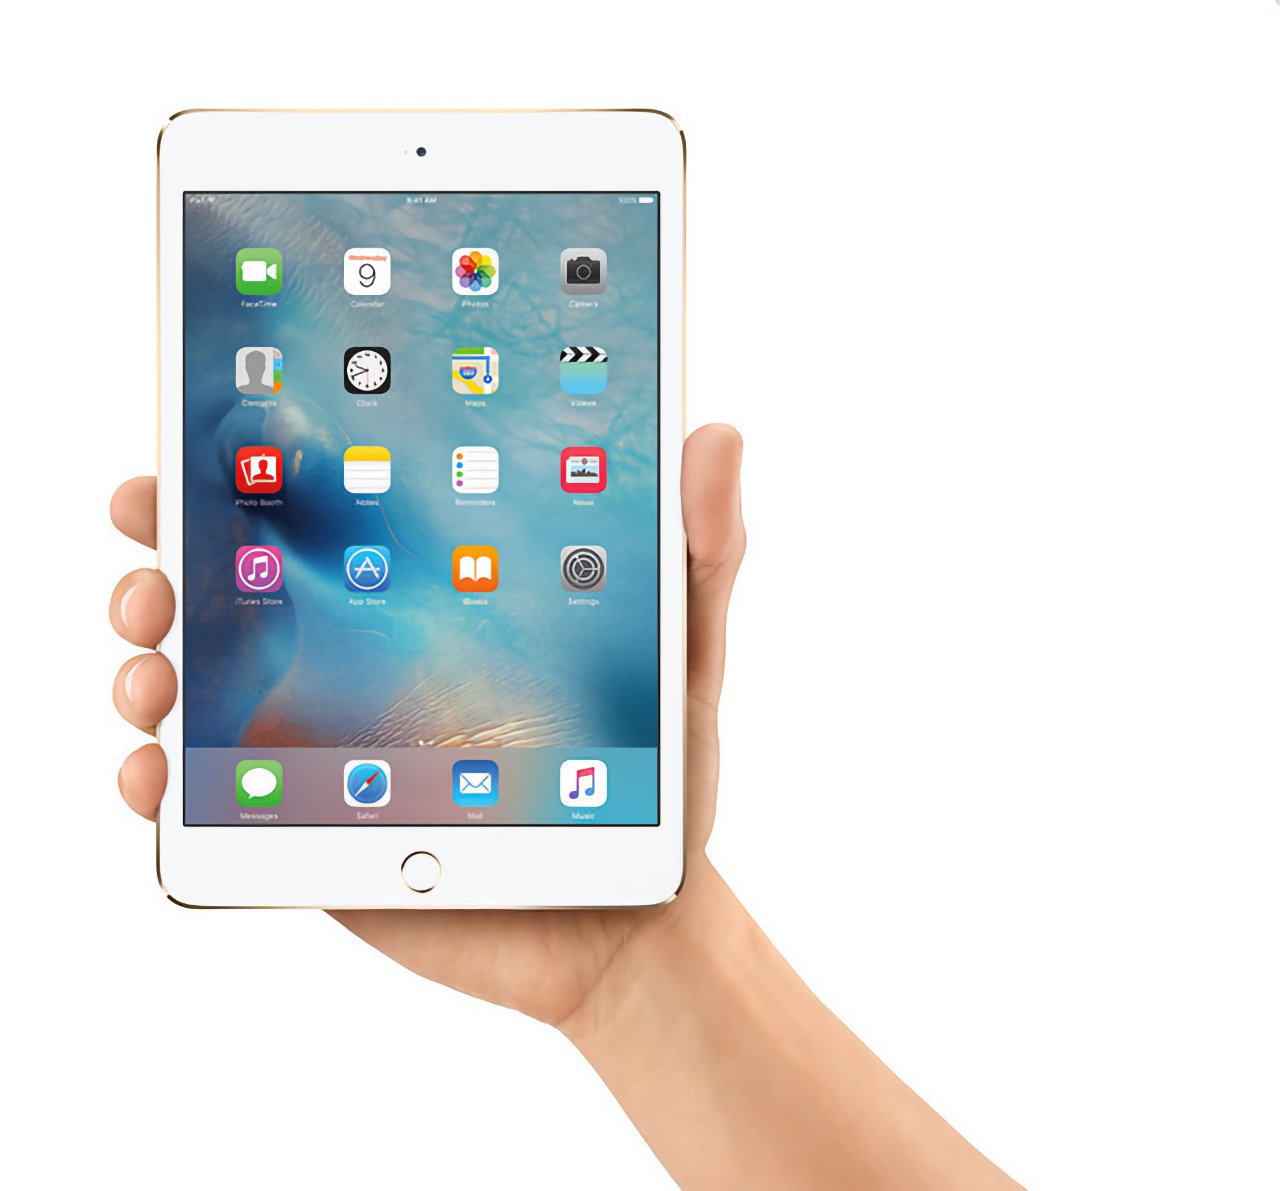 The iPad mini launched in 2012 and we learned we'd never hear of it again